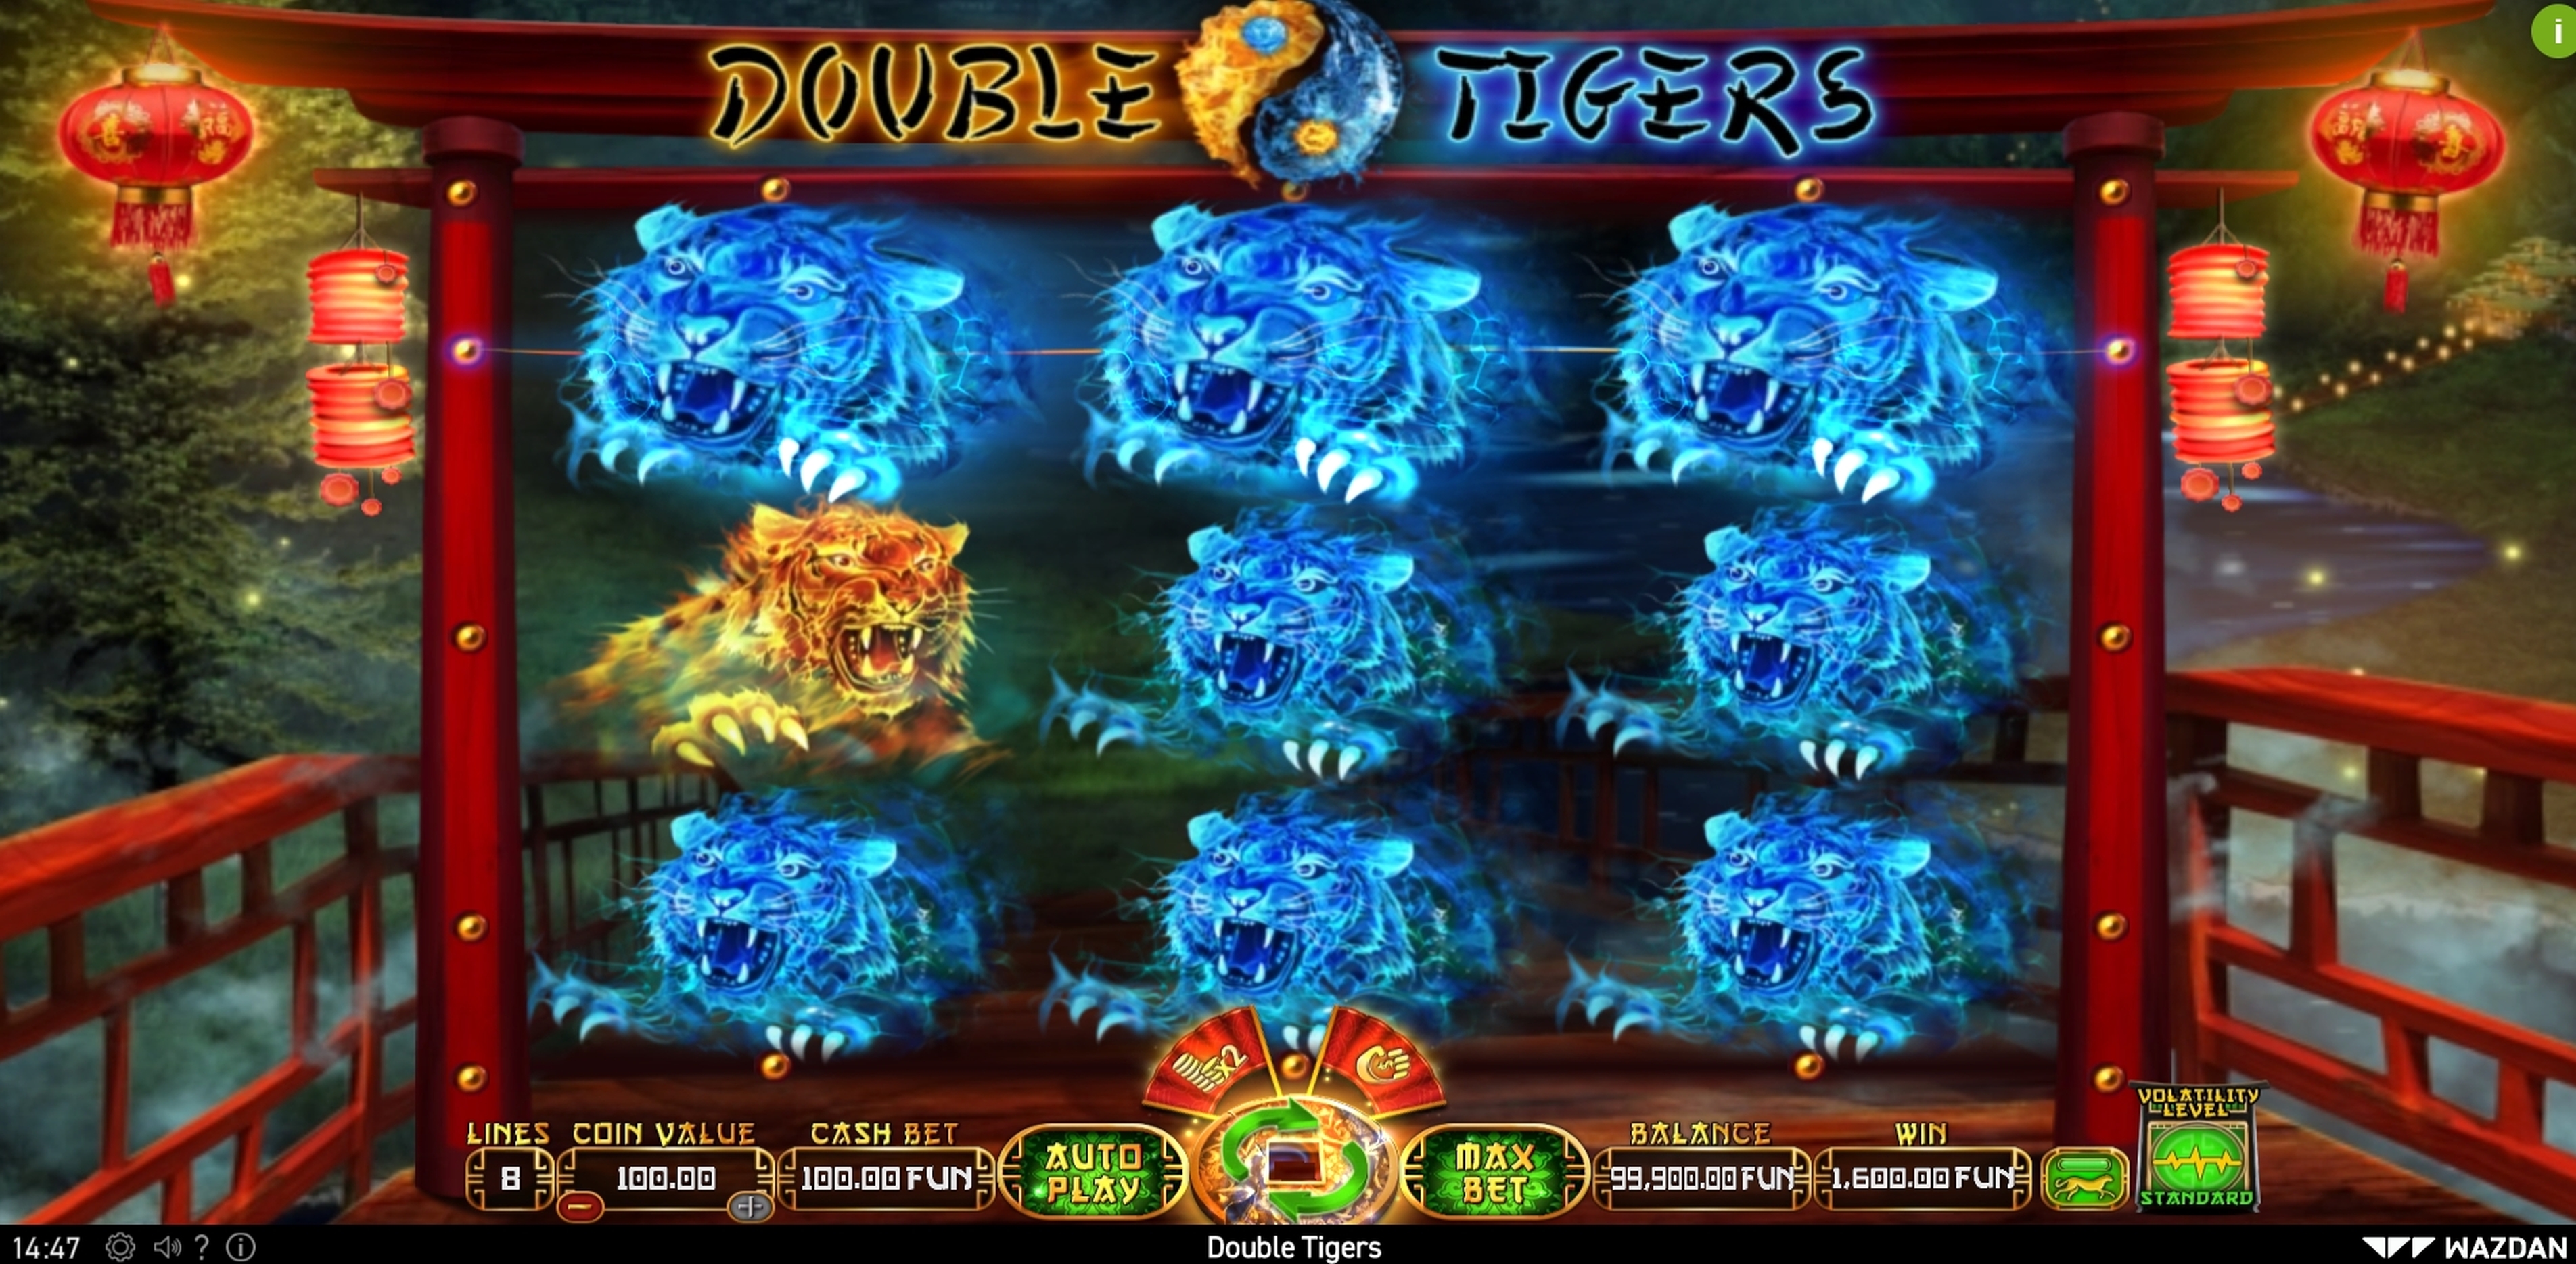 Win Money in Double Tigers Free Slot Game by Wazdan